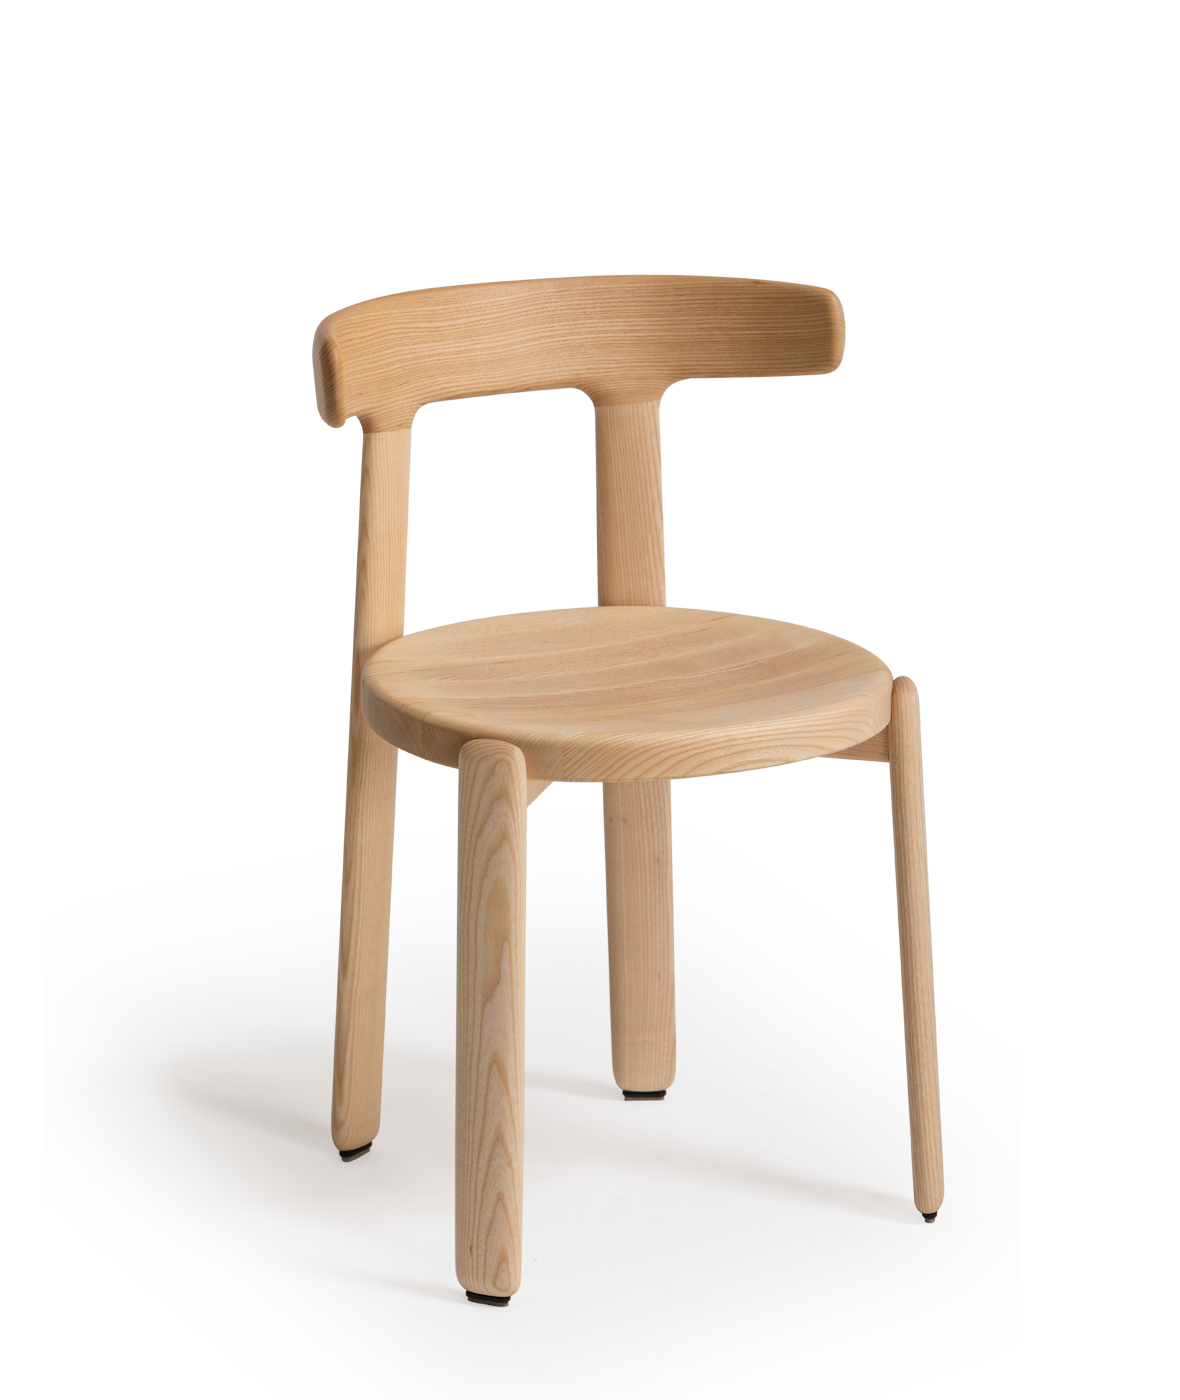 Tura chair with wooden structure - Vergés